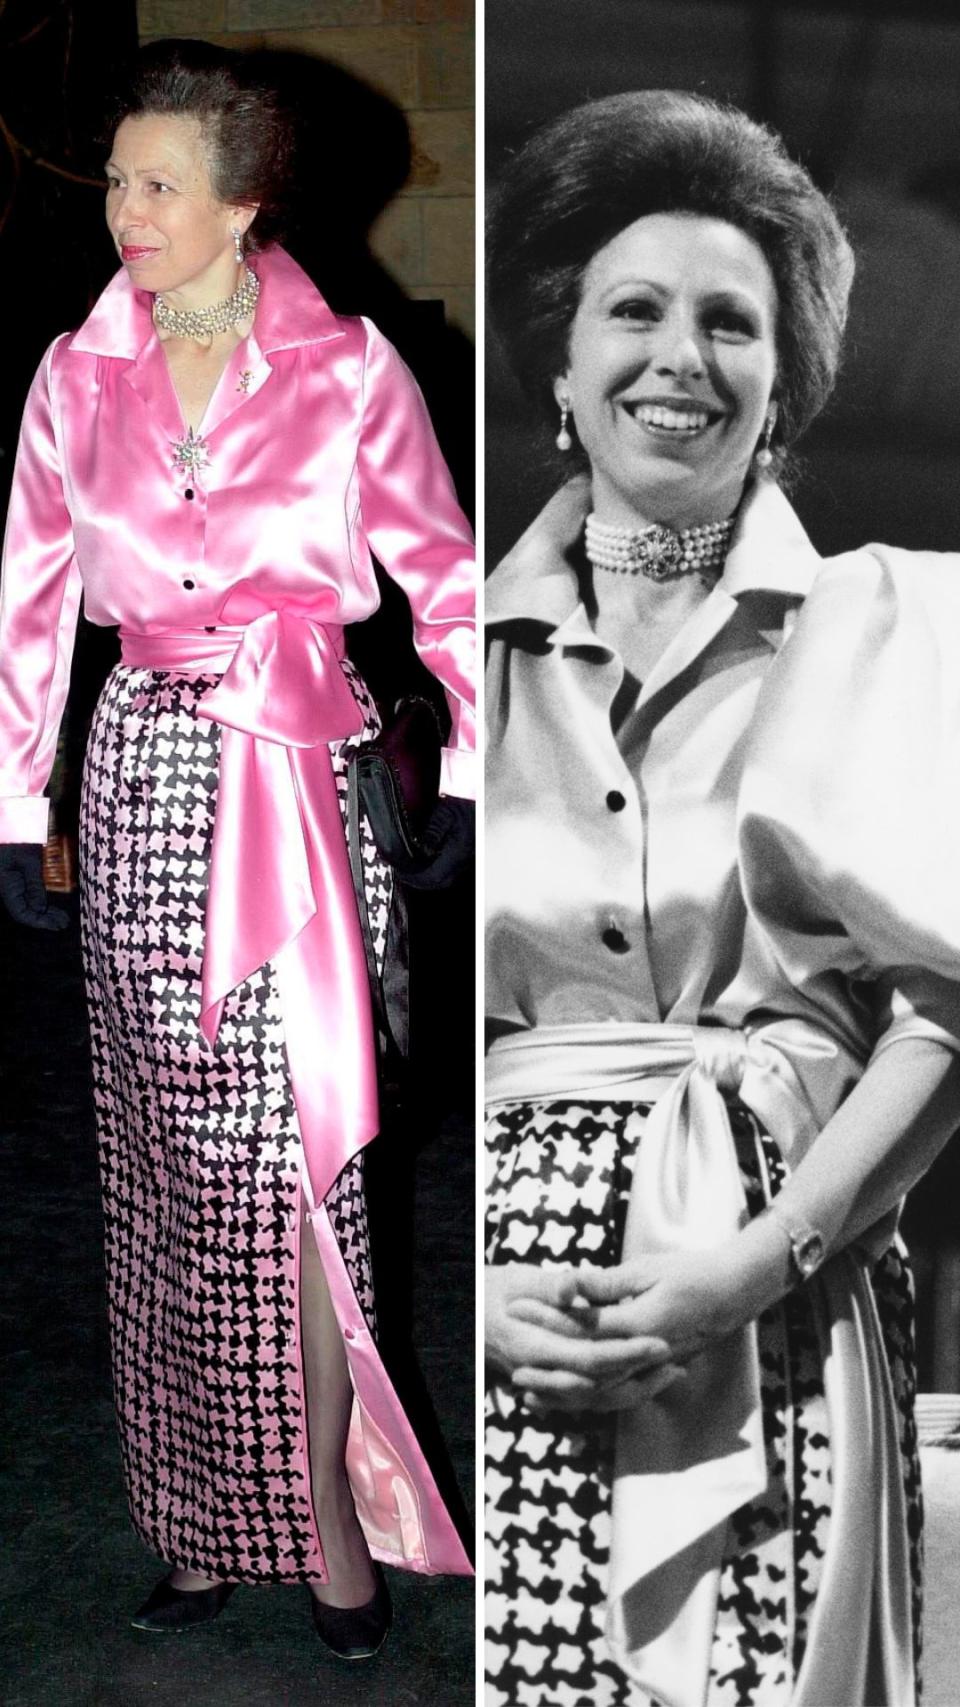 When she reworked a decades old outfit - and still looked great!